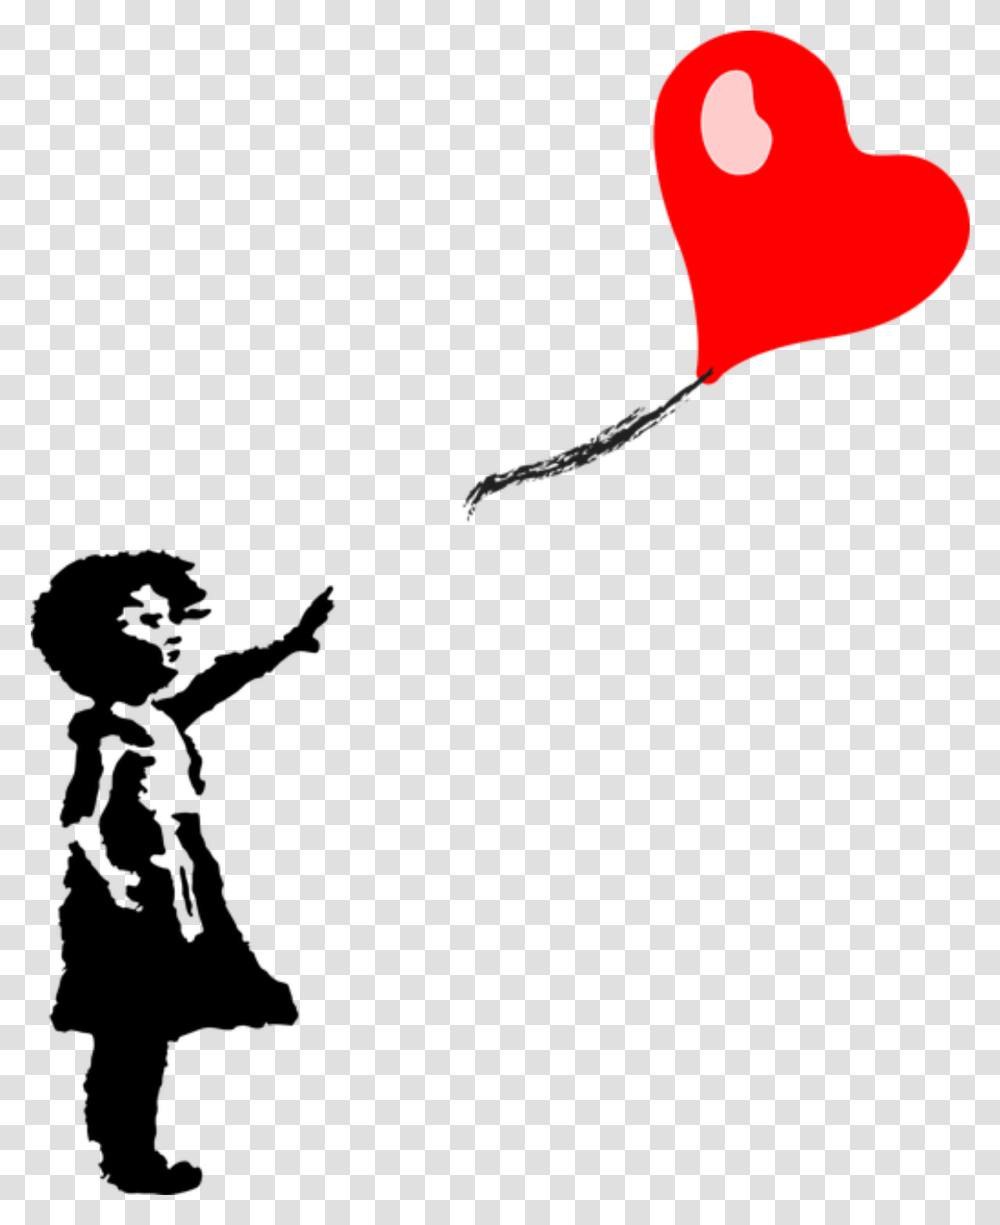 Little Girl And Heart Shaped Balloon Clip Arts Childhood Social Media, Silhouette, Kite, Toy, Rose Transparent Png